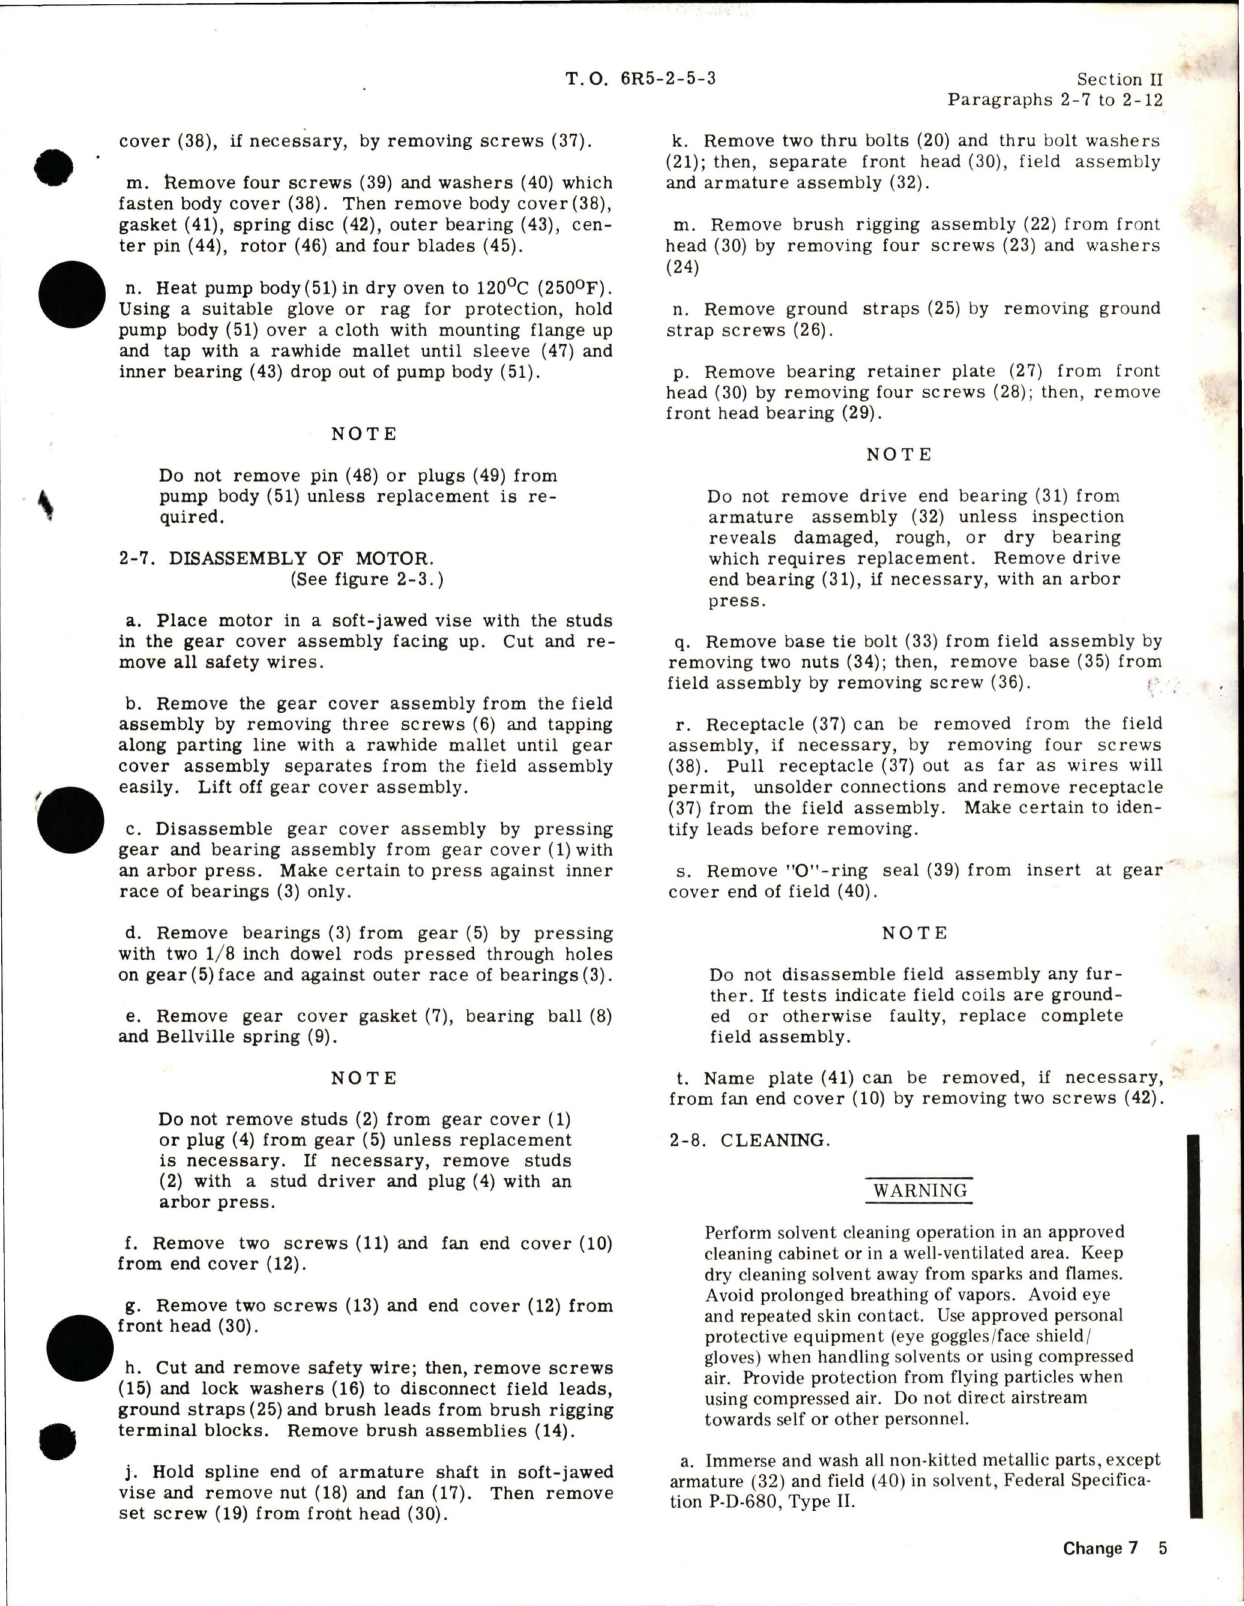 Sample page 9 from AirCorps Library document: Overhaul for Electric Motor Driven Fuel Pumps